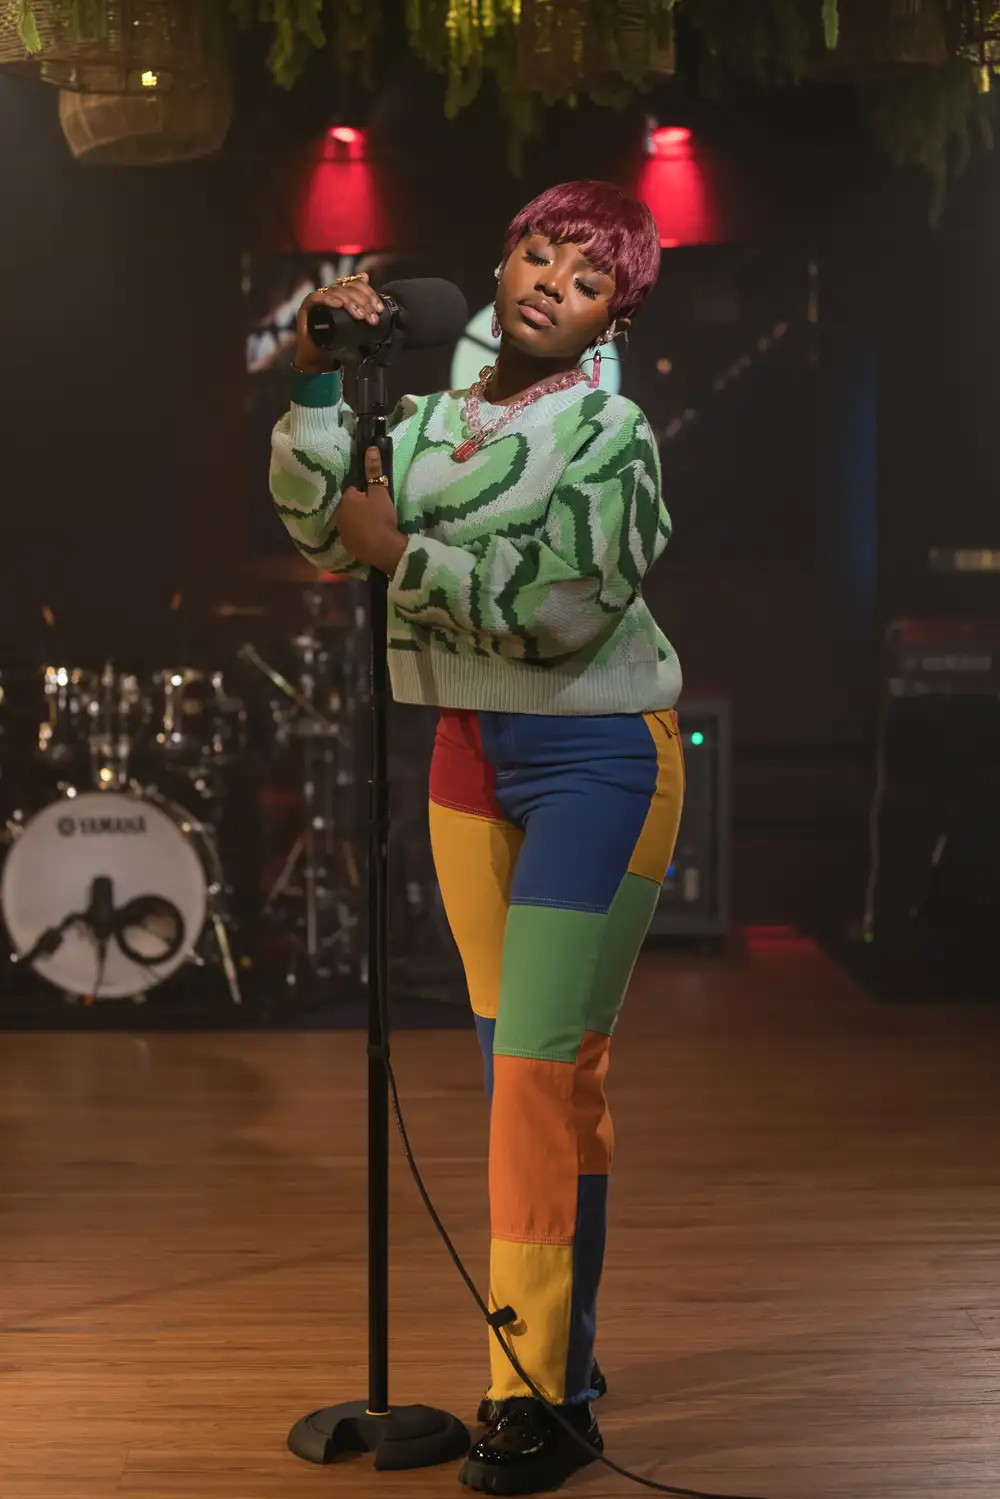 Singer Gyakie with the microphone